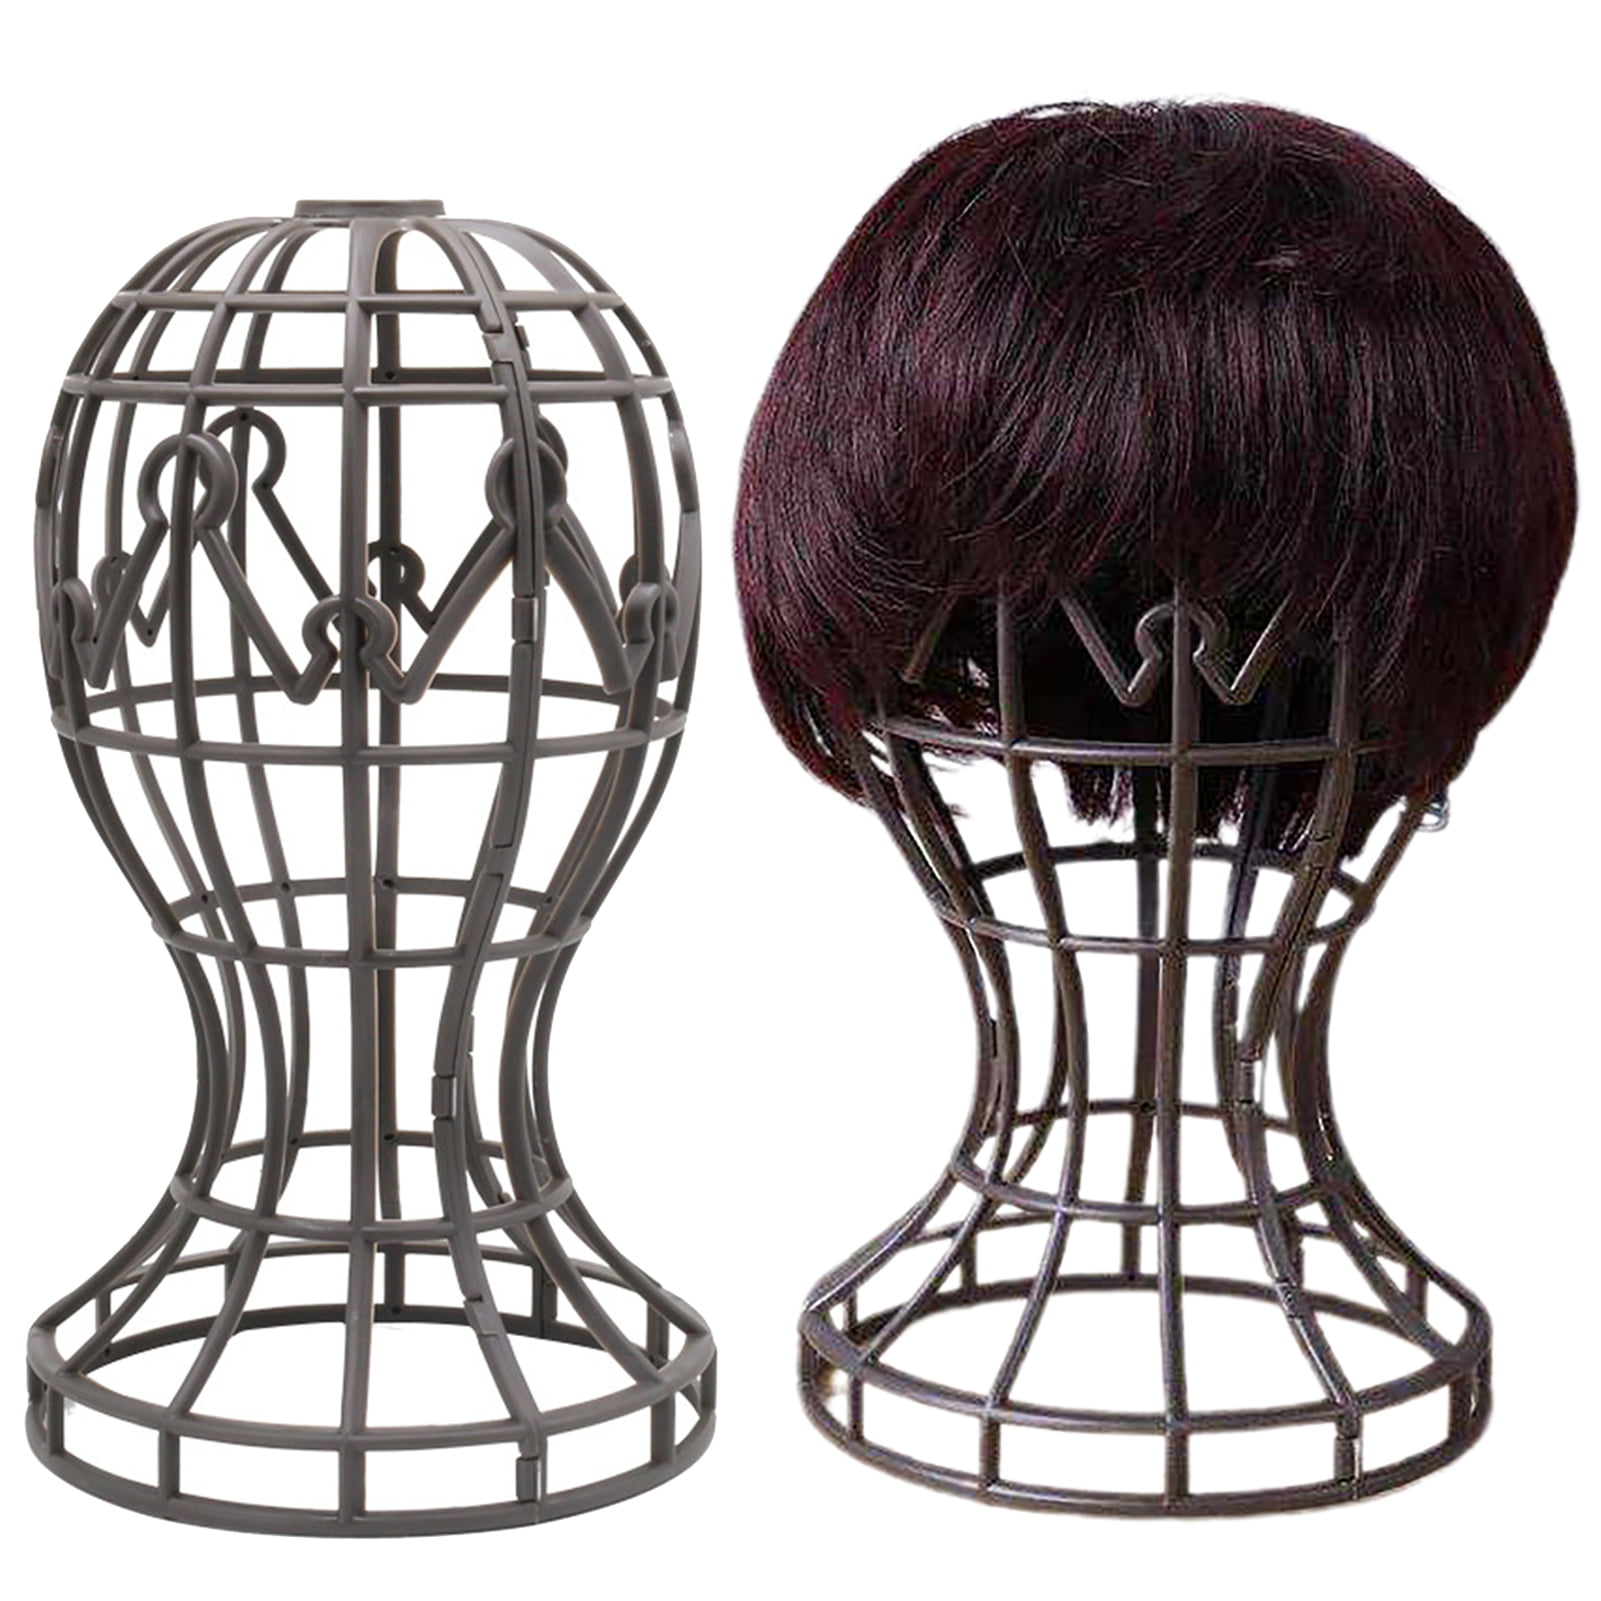 Portable Wig Stand For Women Travel friendly Wig Head - Temu